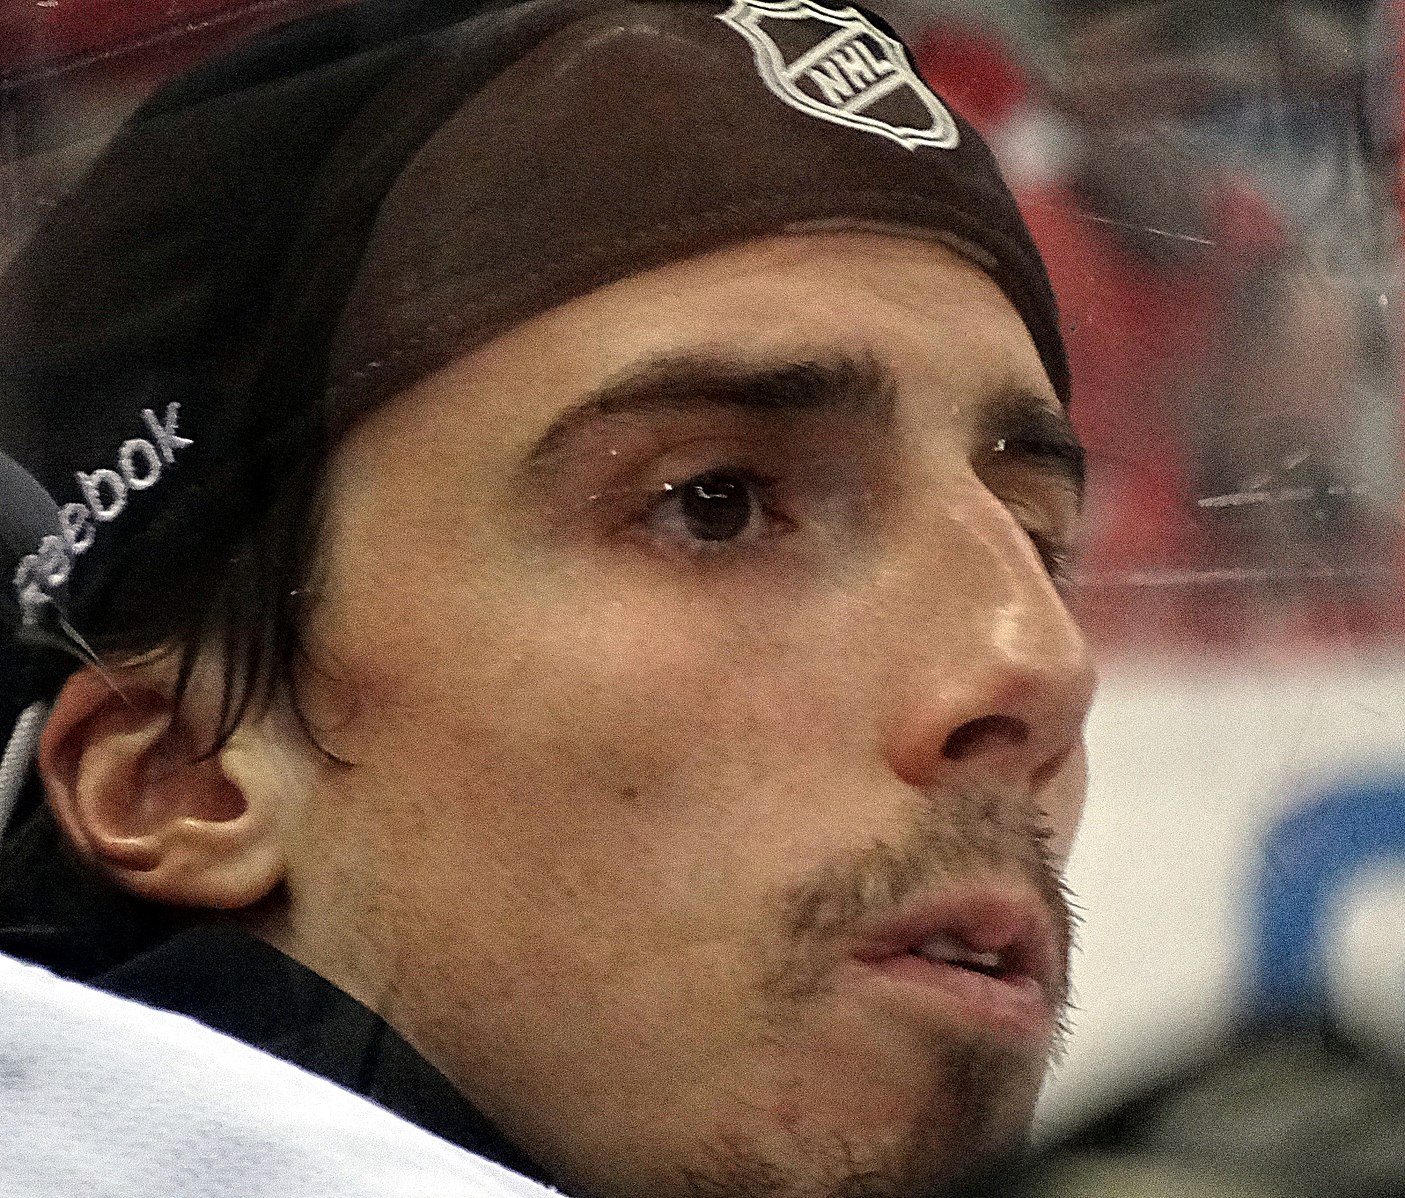 Marc-Andre Fleury unlikely to waive no trade clause